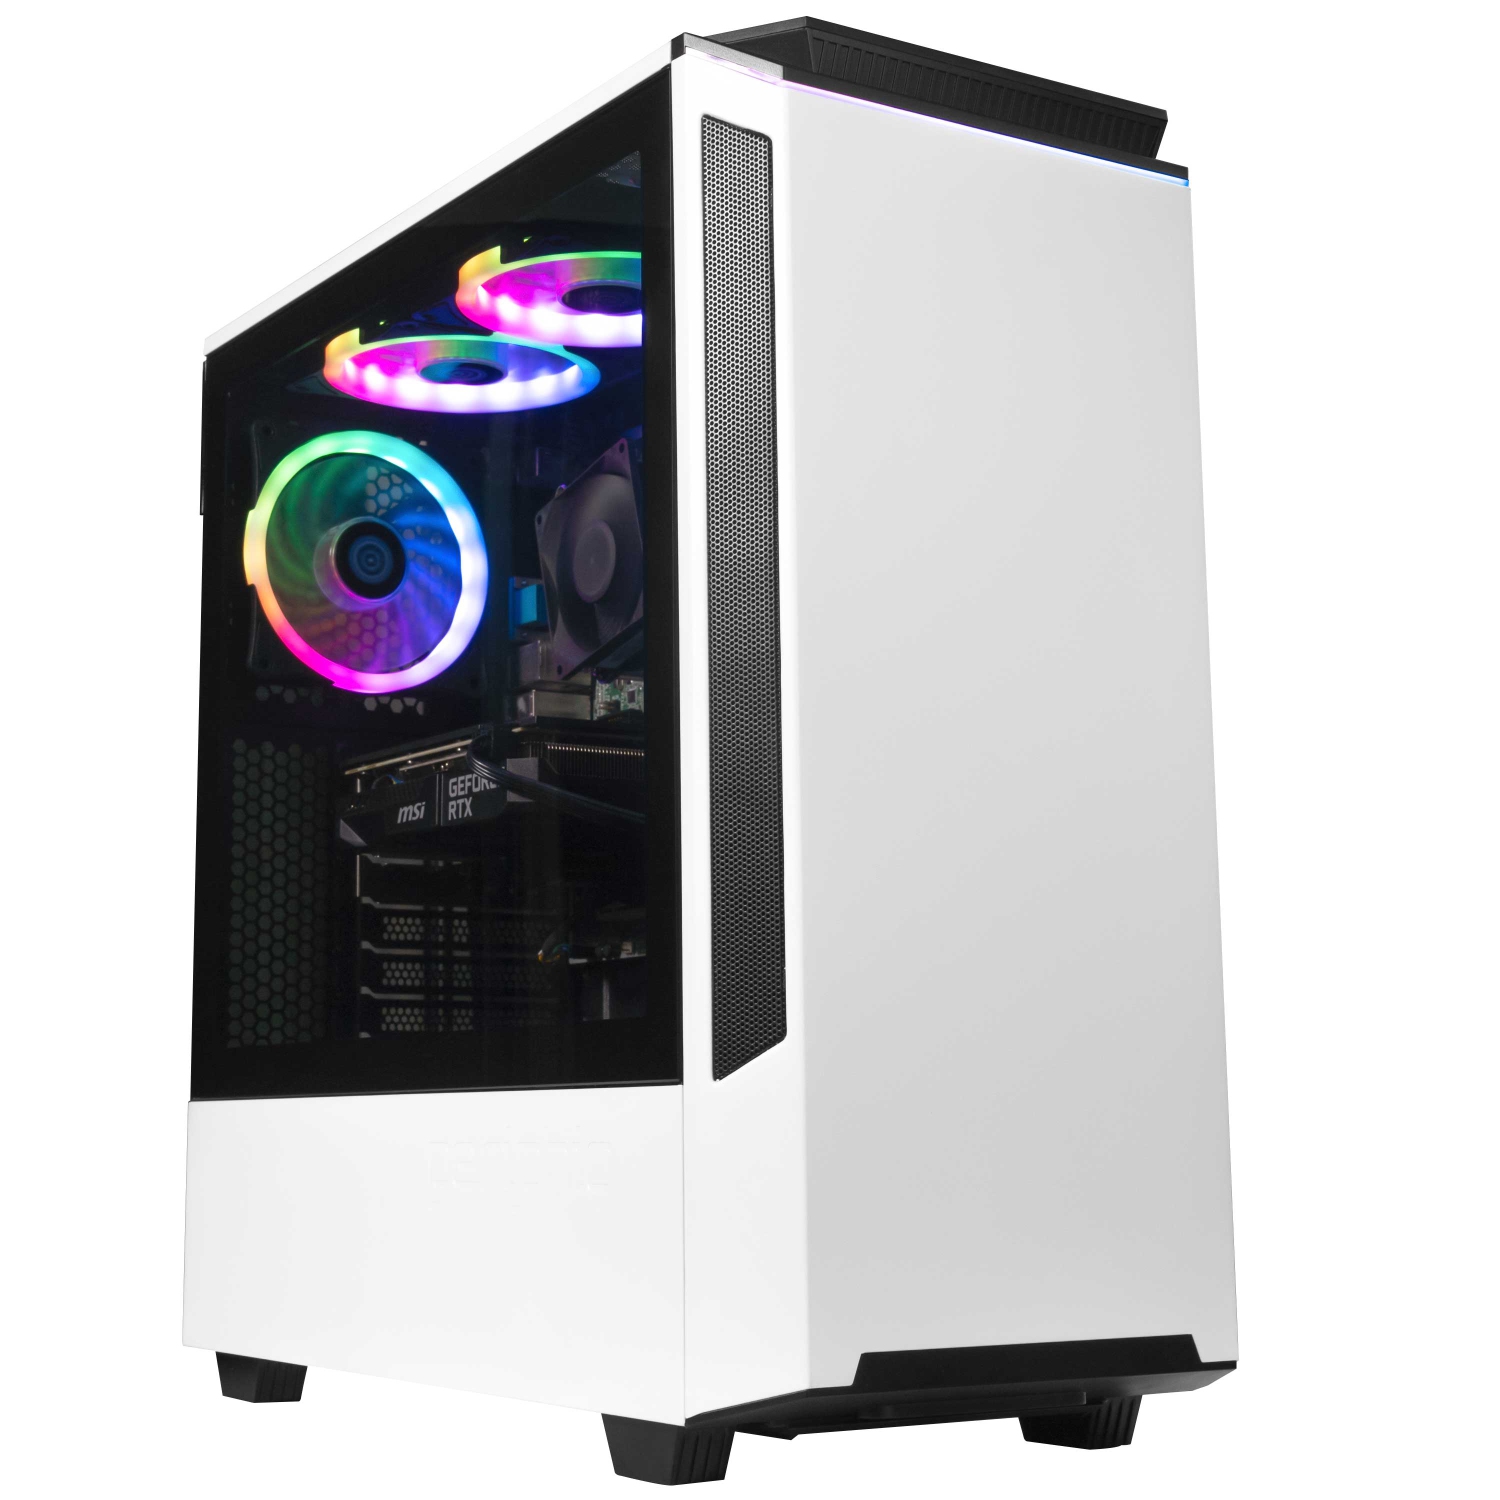 Refurbished (Excellent) Periphio Ecto Gaming PC - GeForce RTX 3050 (8GB) | Intel Core i5-6500 (3.6GHz Turbo) | 1TB Solid State SSD | 16GB DDR4 | Windows 10 | WiFi + BT